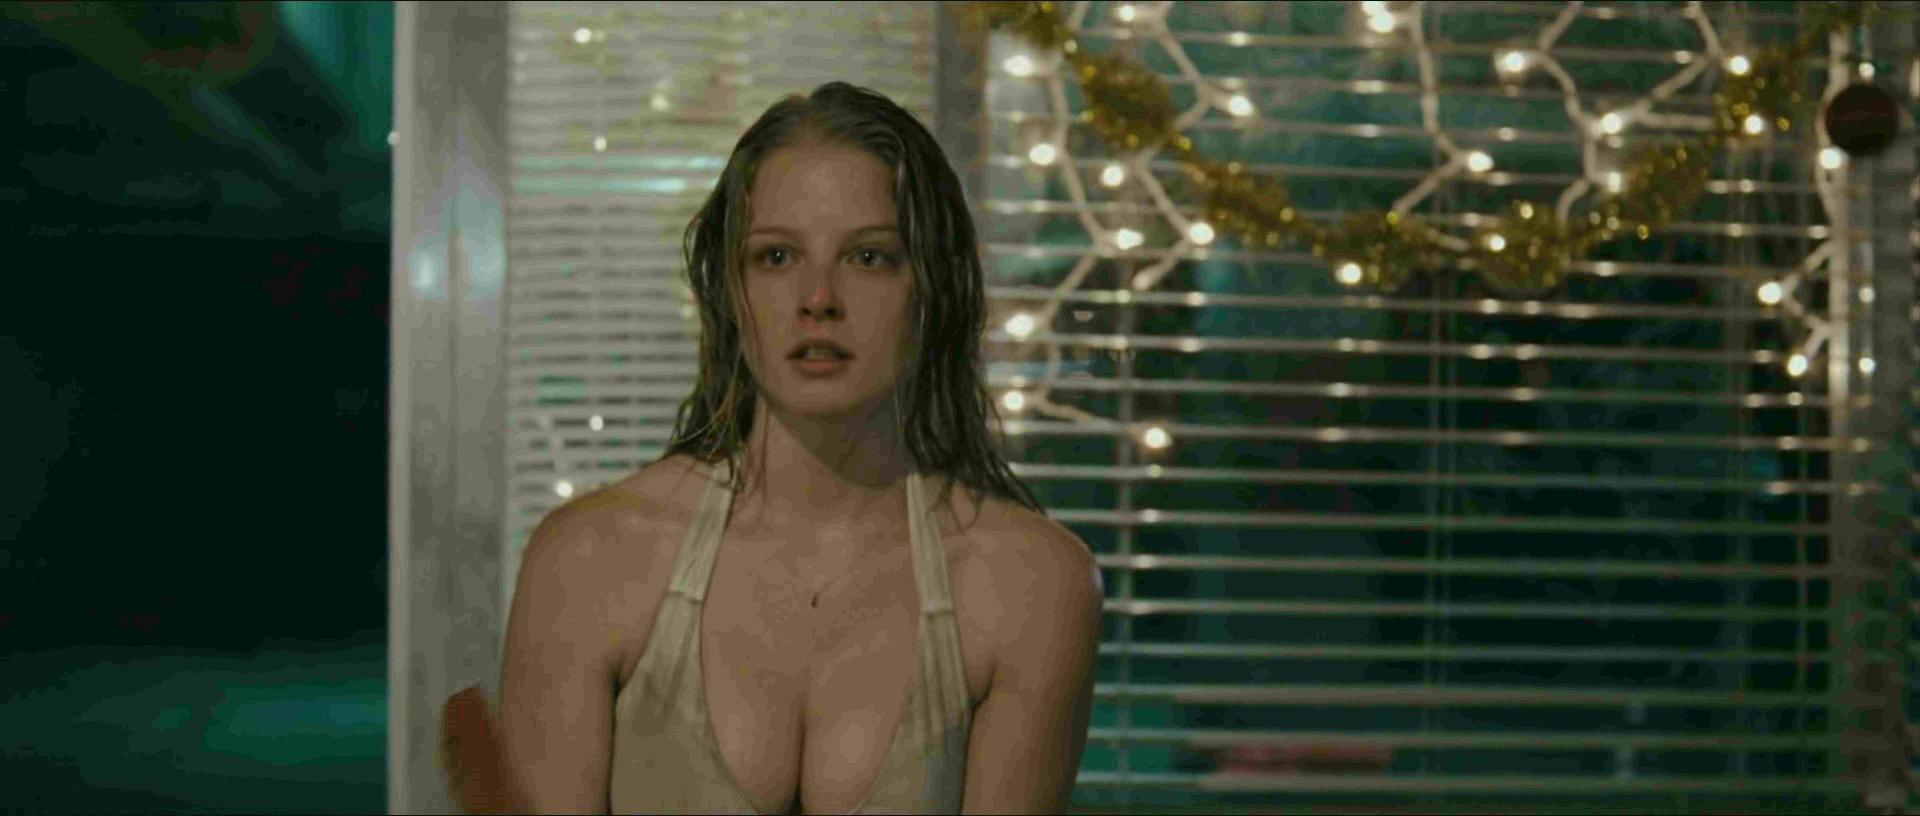 Stacked Beauty Rachel Nichols Showing Her Breasts and More (7 LQ Screencaps)